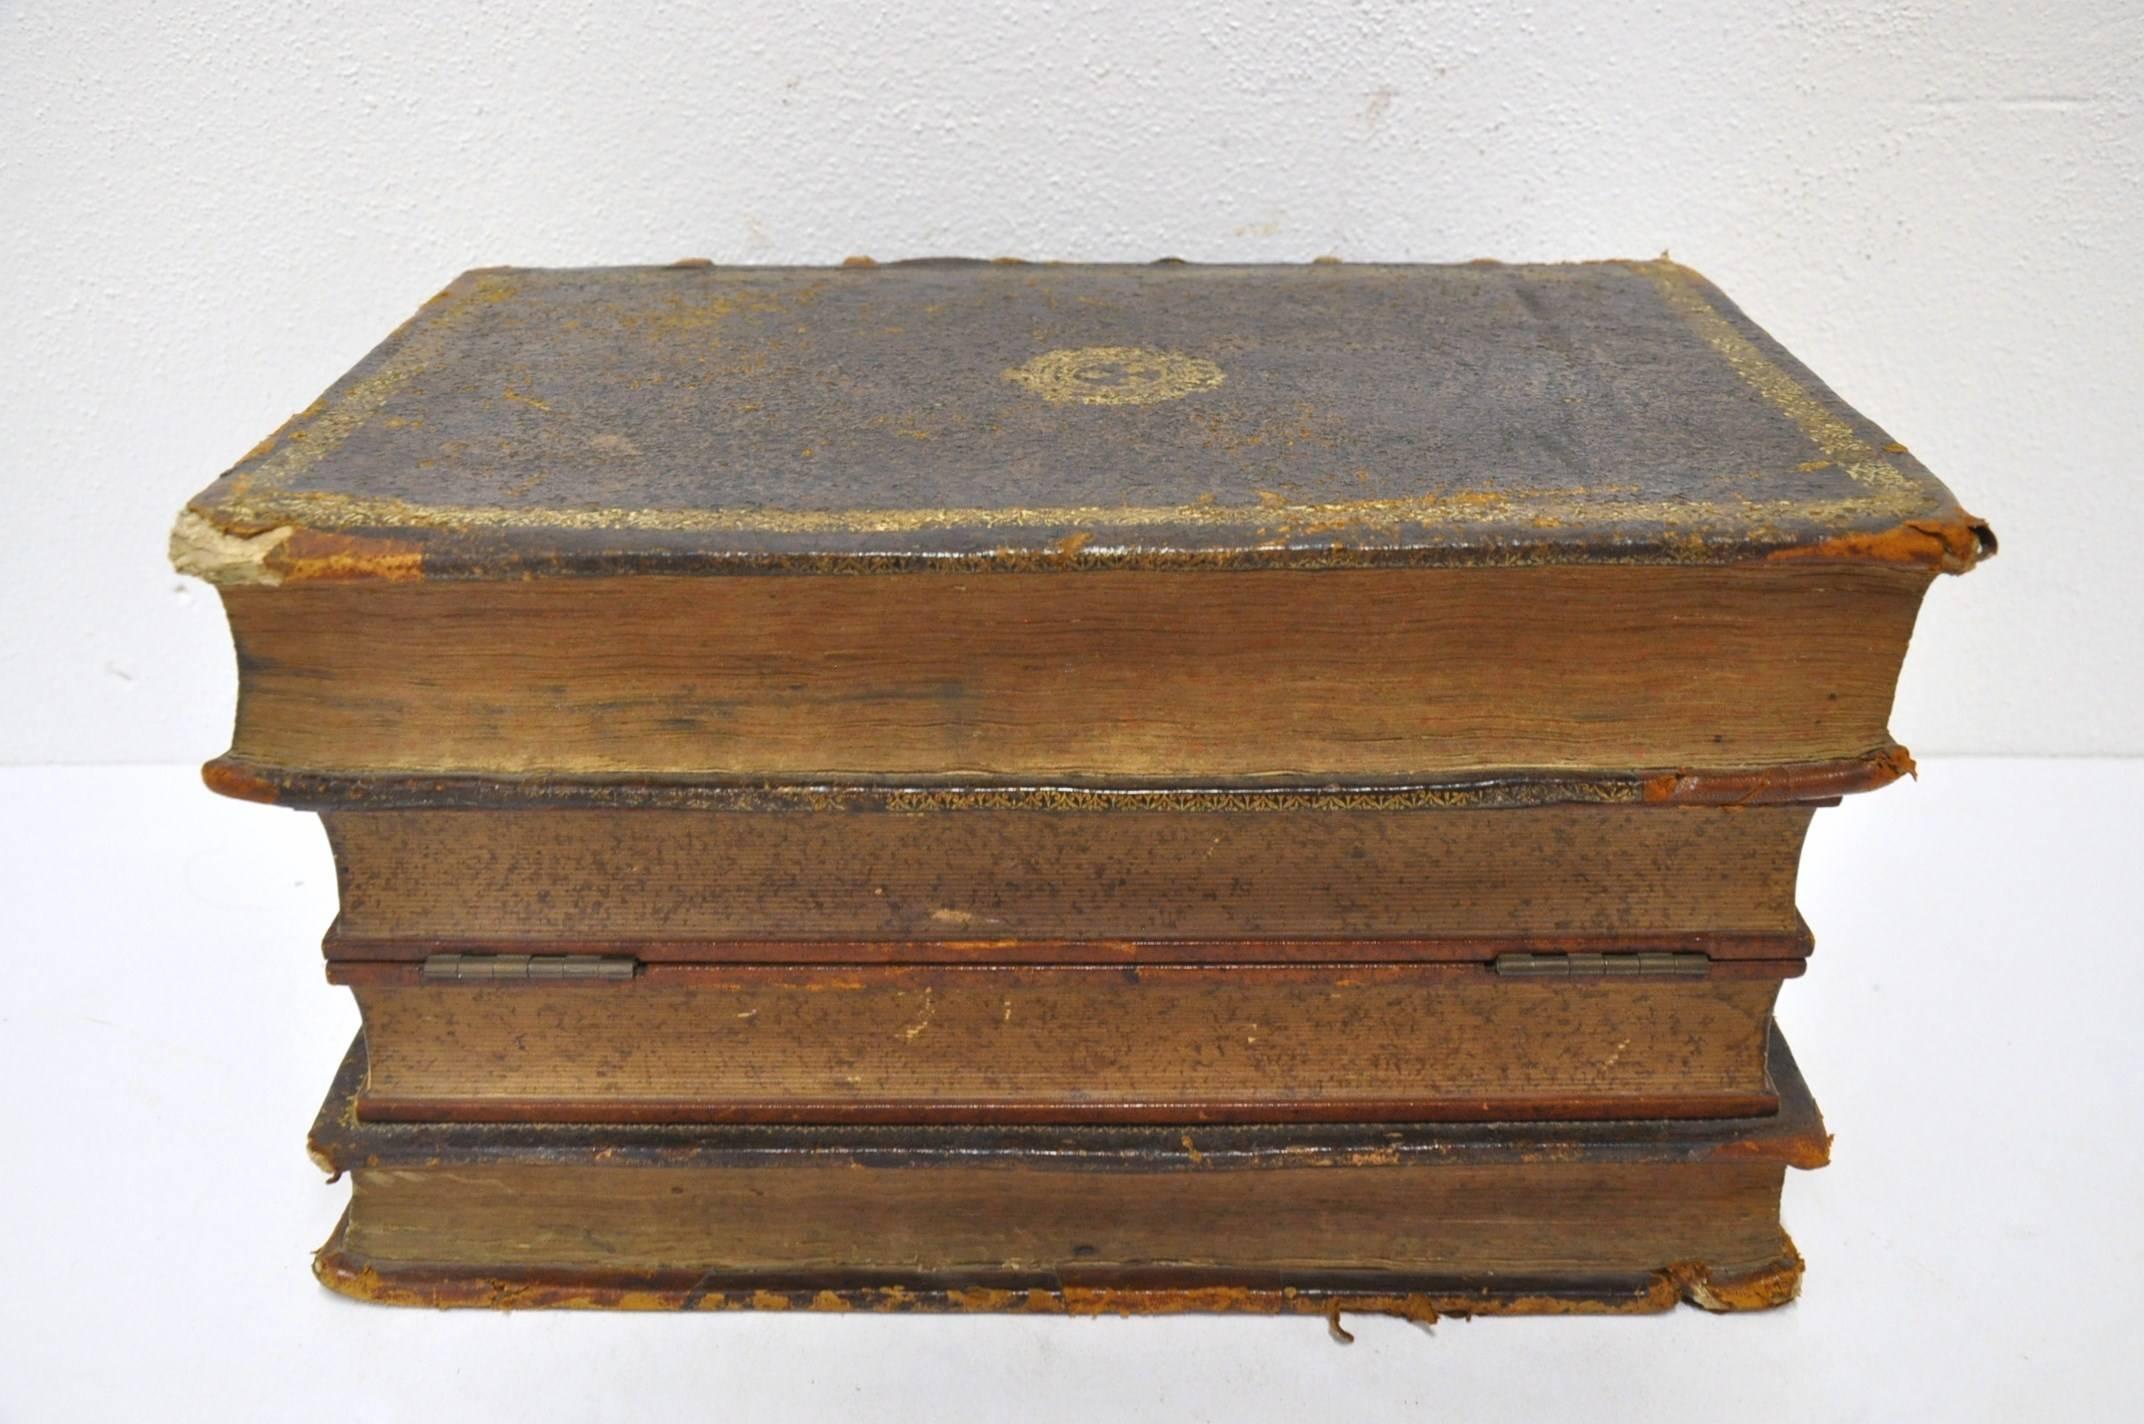 19th Century French Liquor Box Shaped like Four Leatherbound Books 1